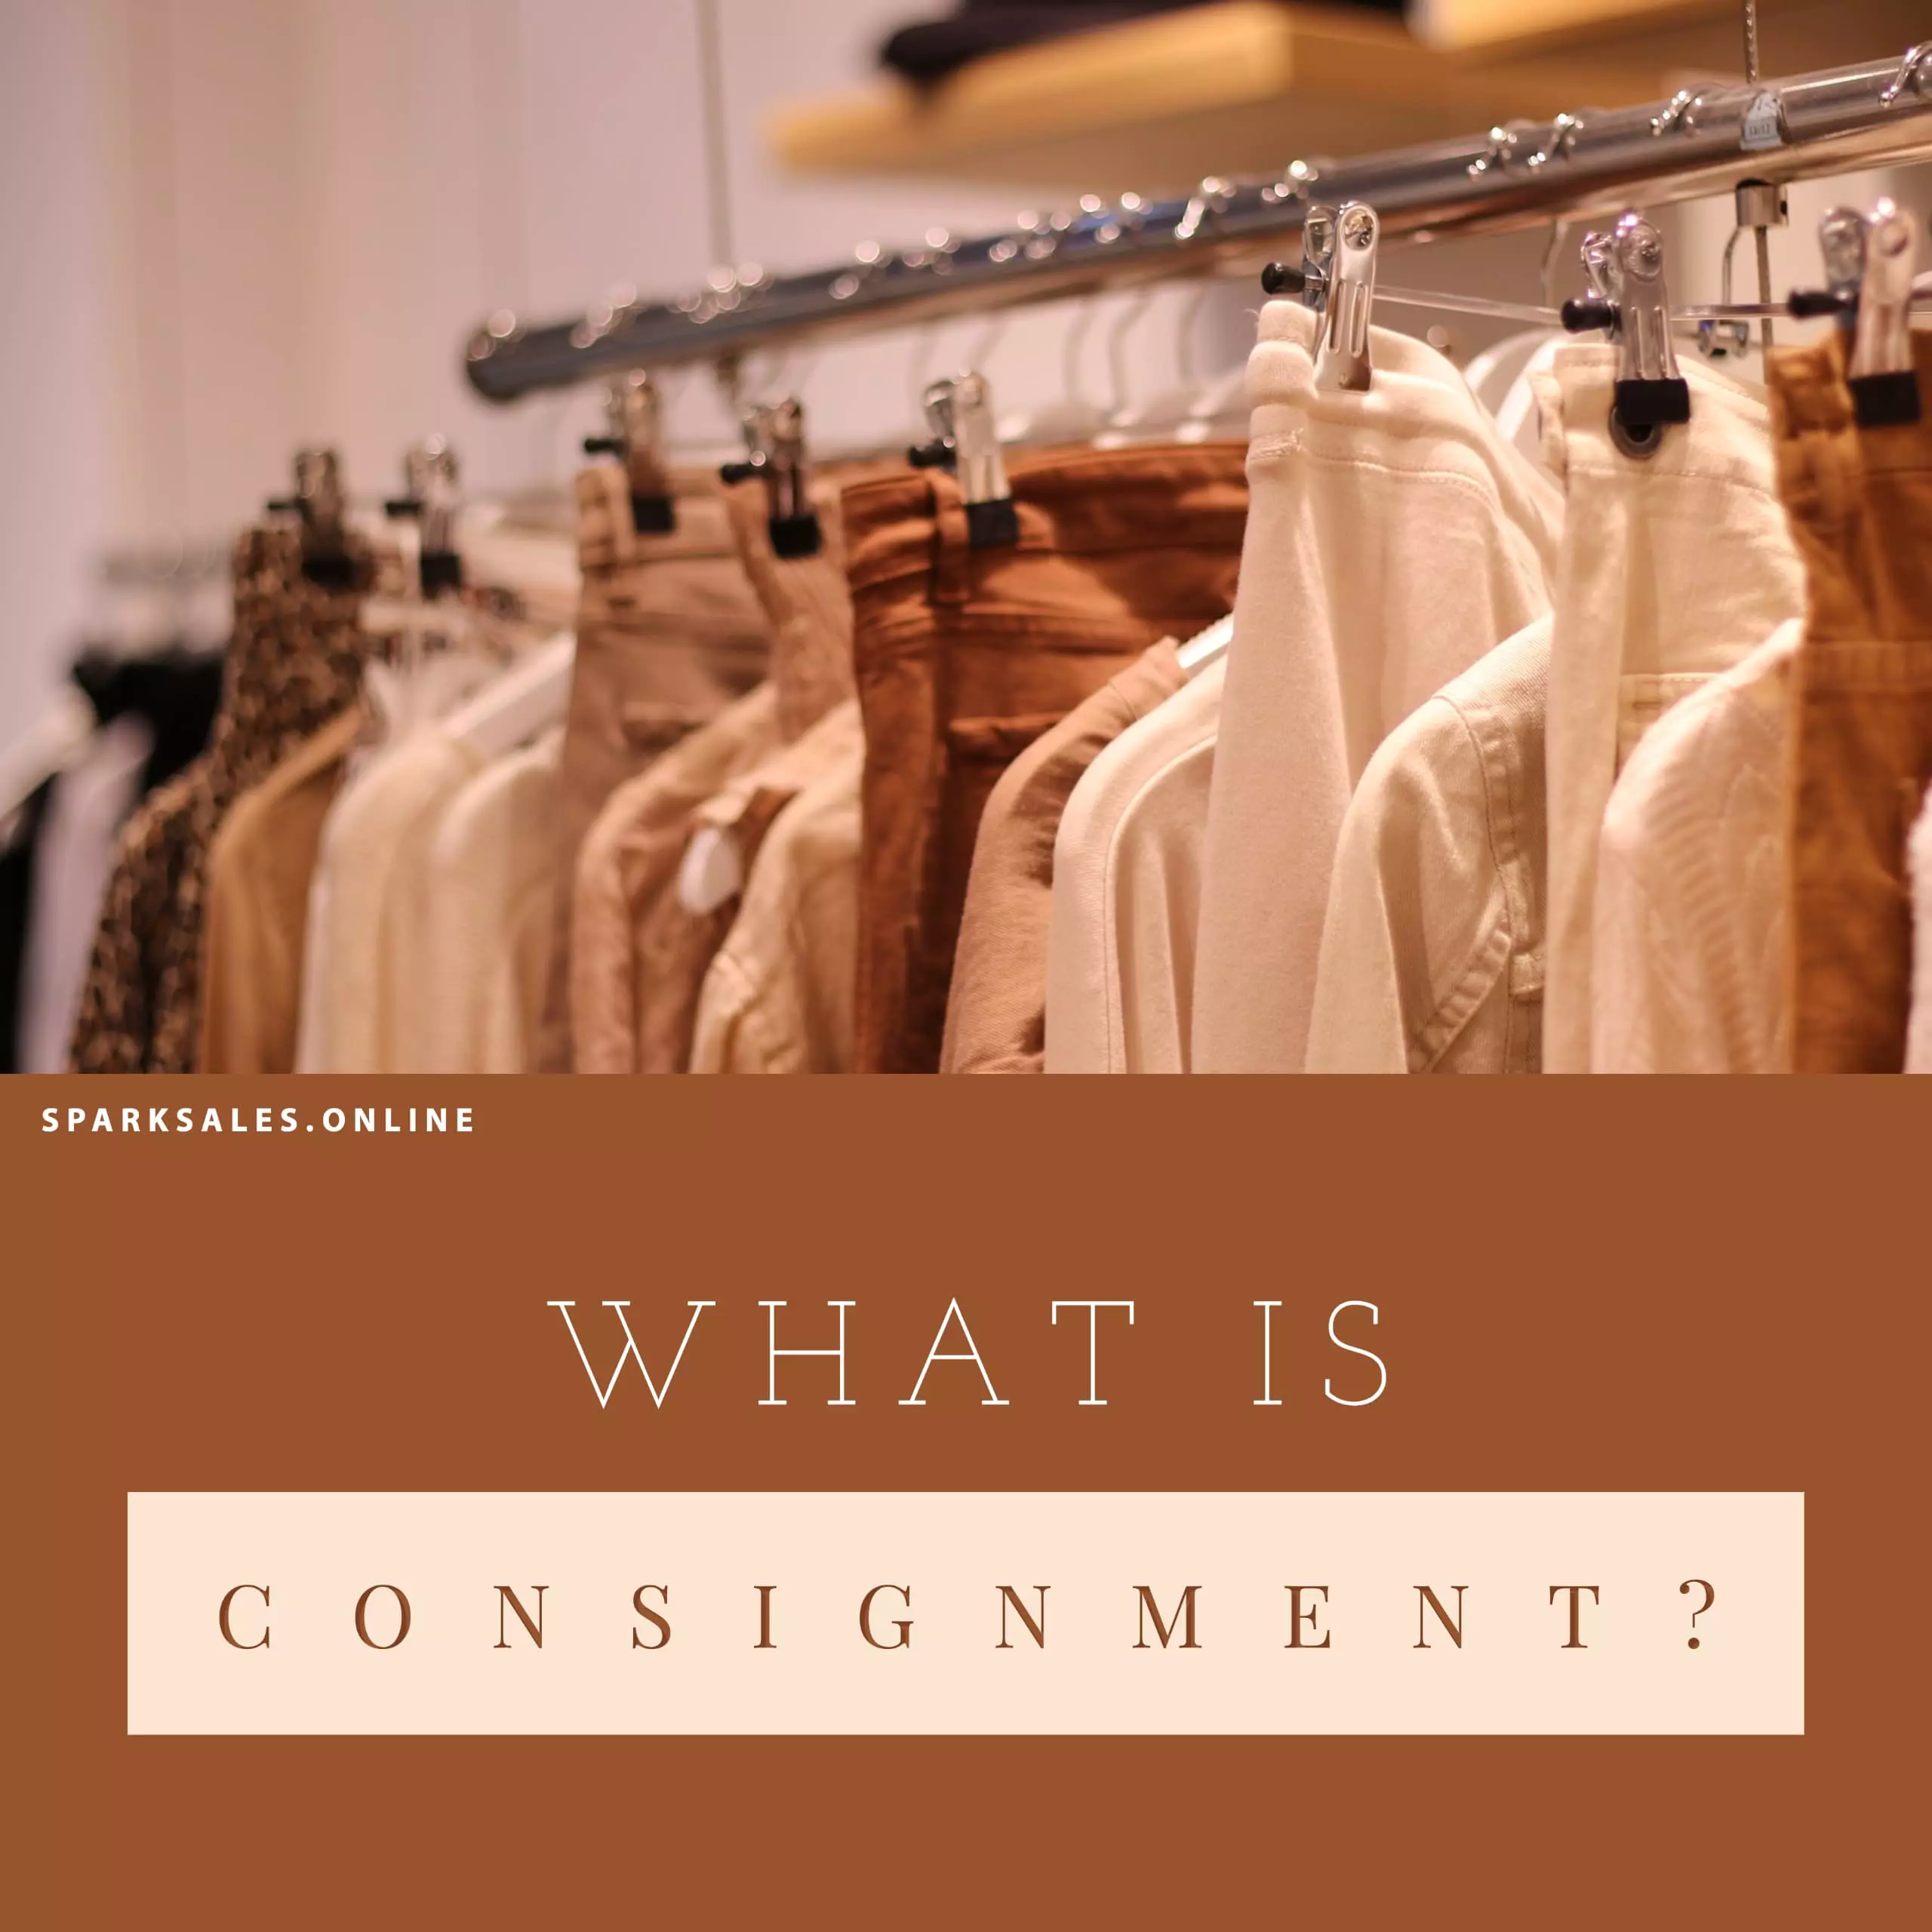 What Is Consignment?